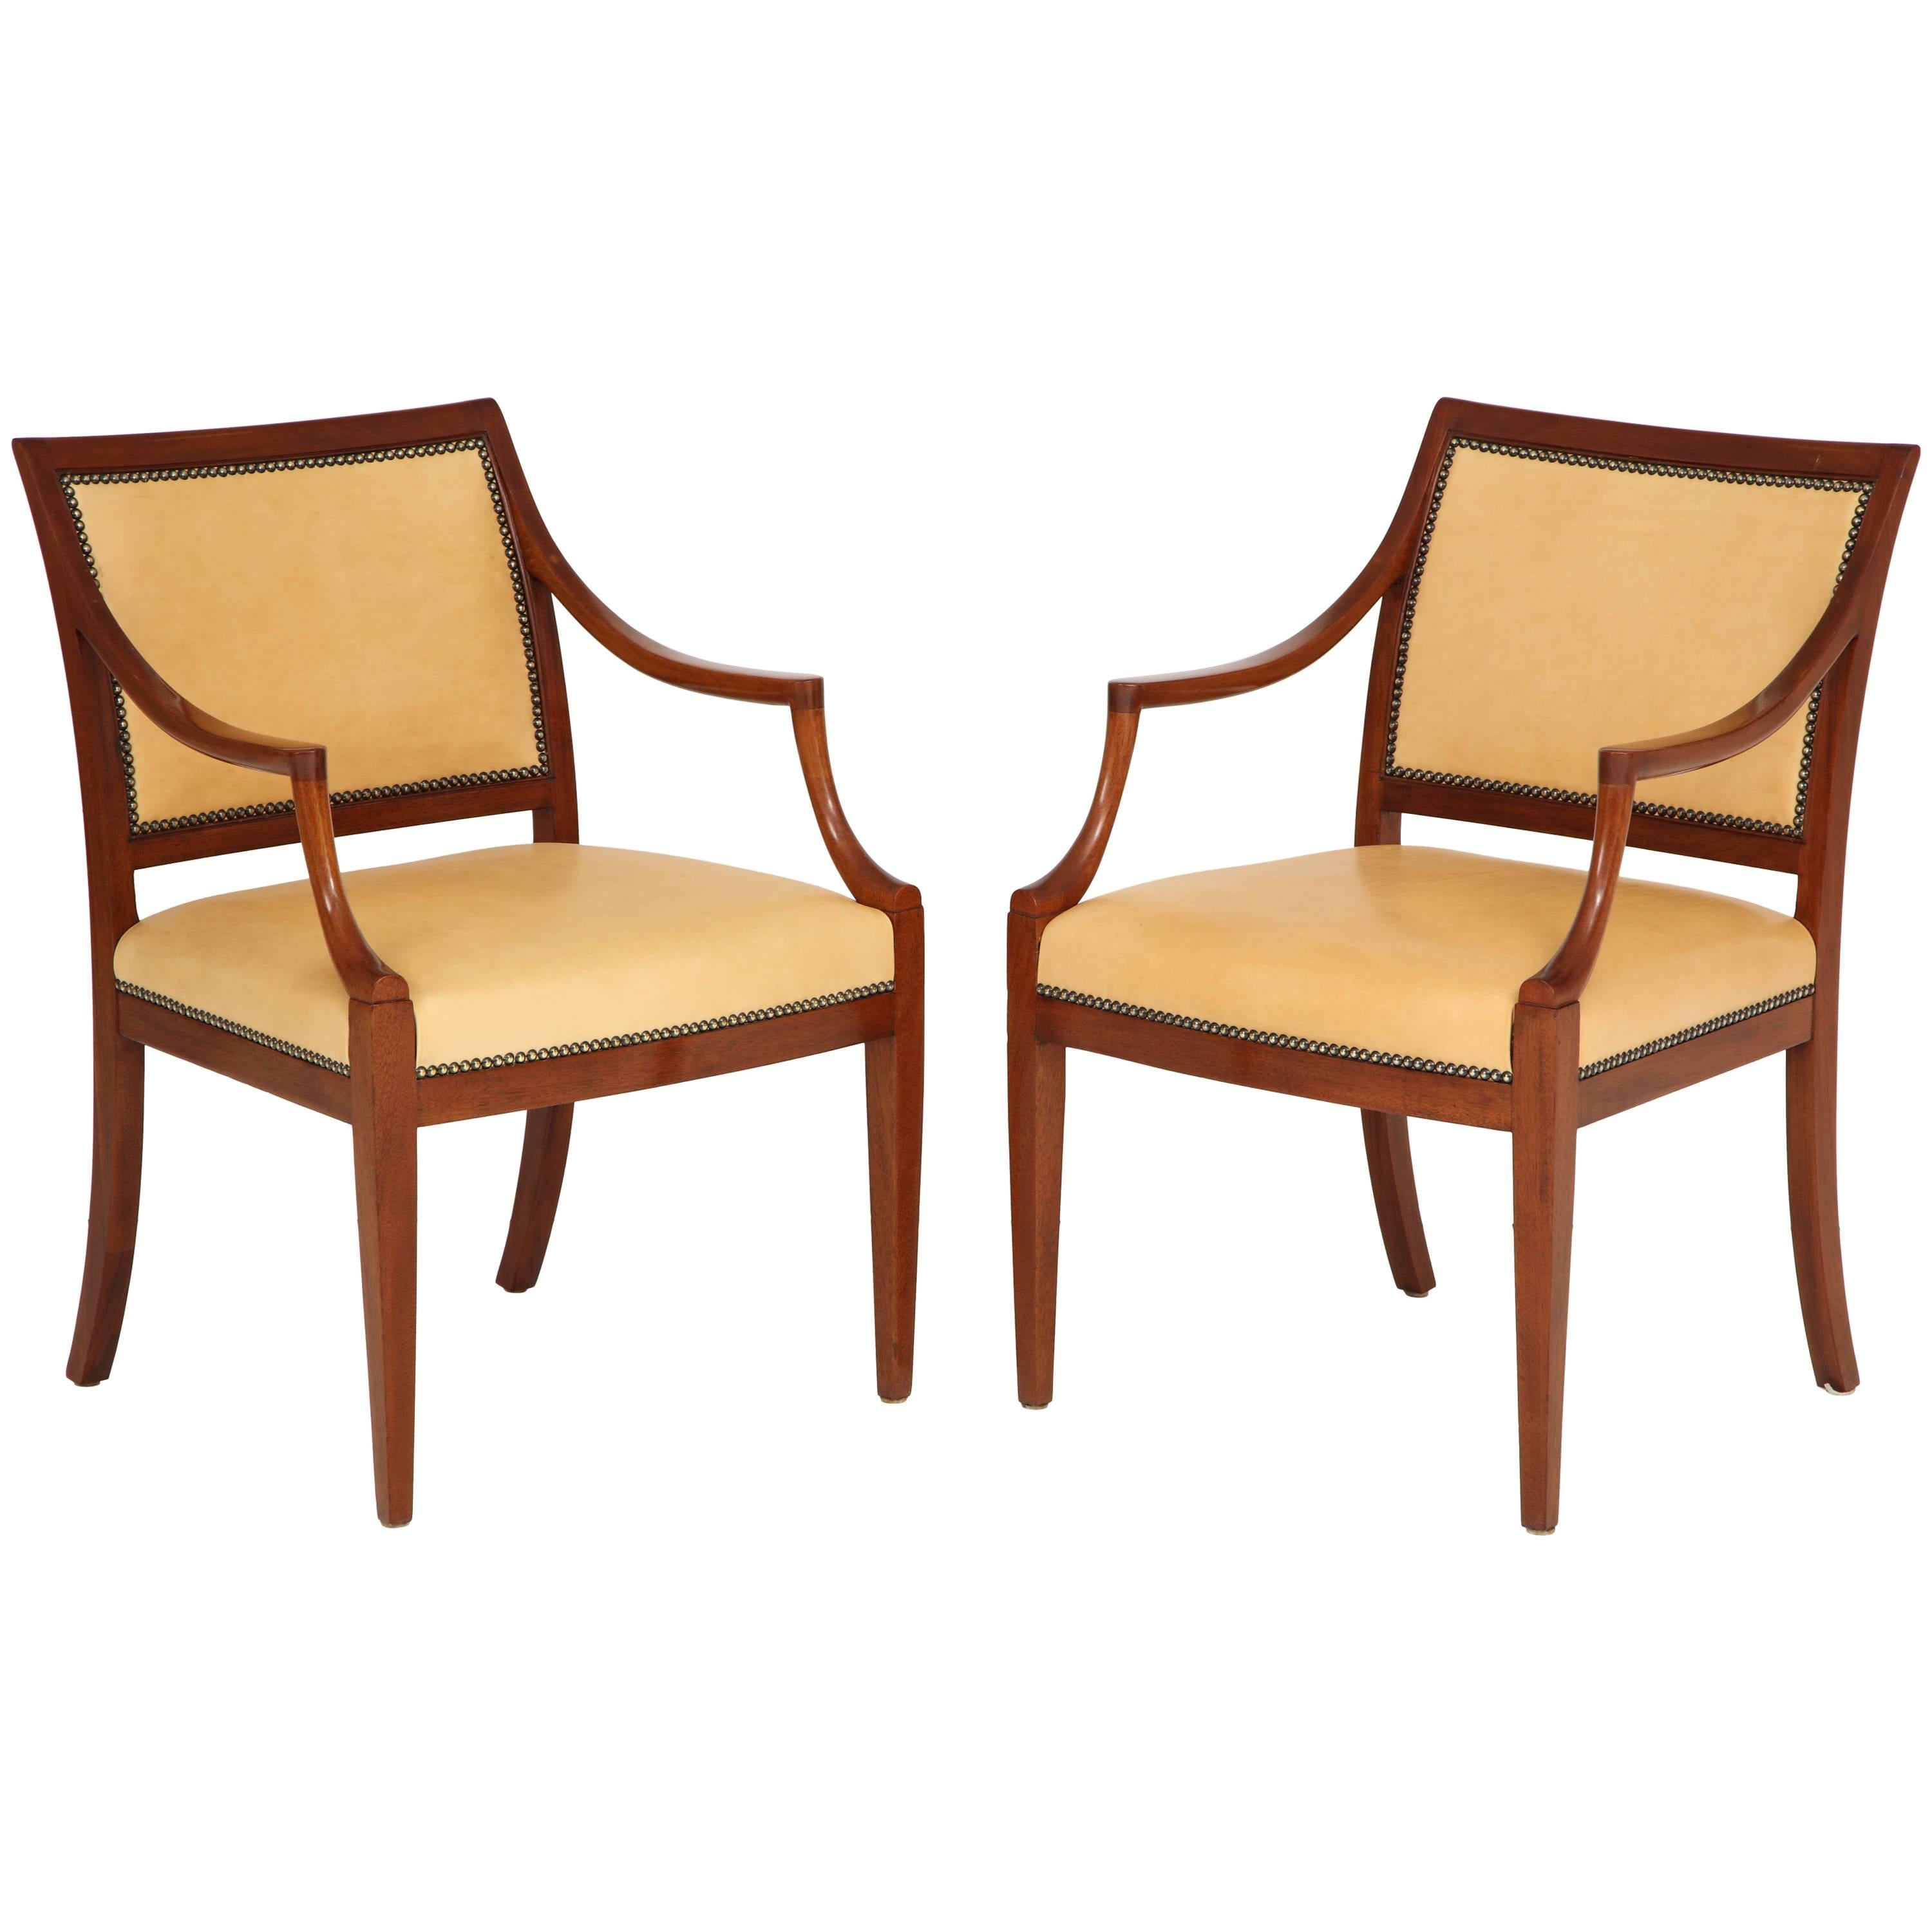 Pair of Frits Henningsen Mahogany and Leather Open Armchair, circa 1940s